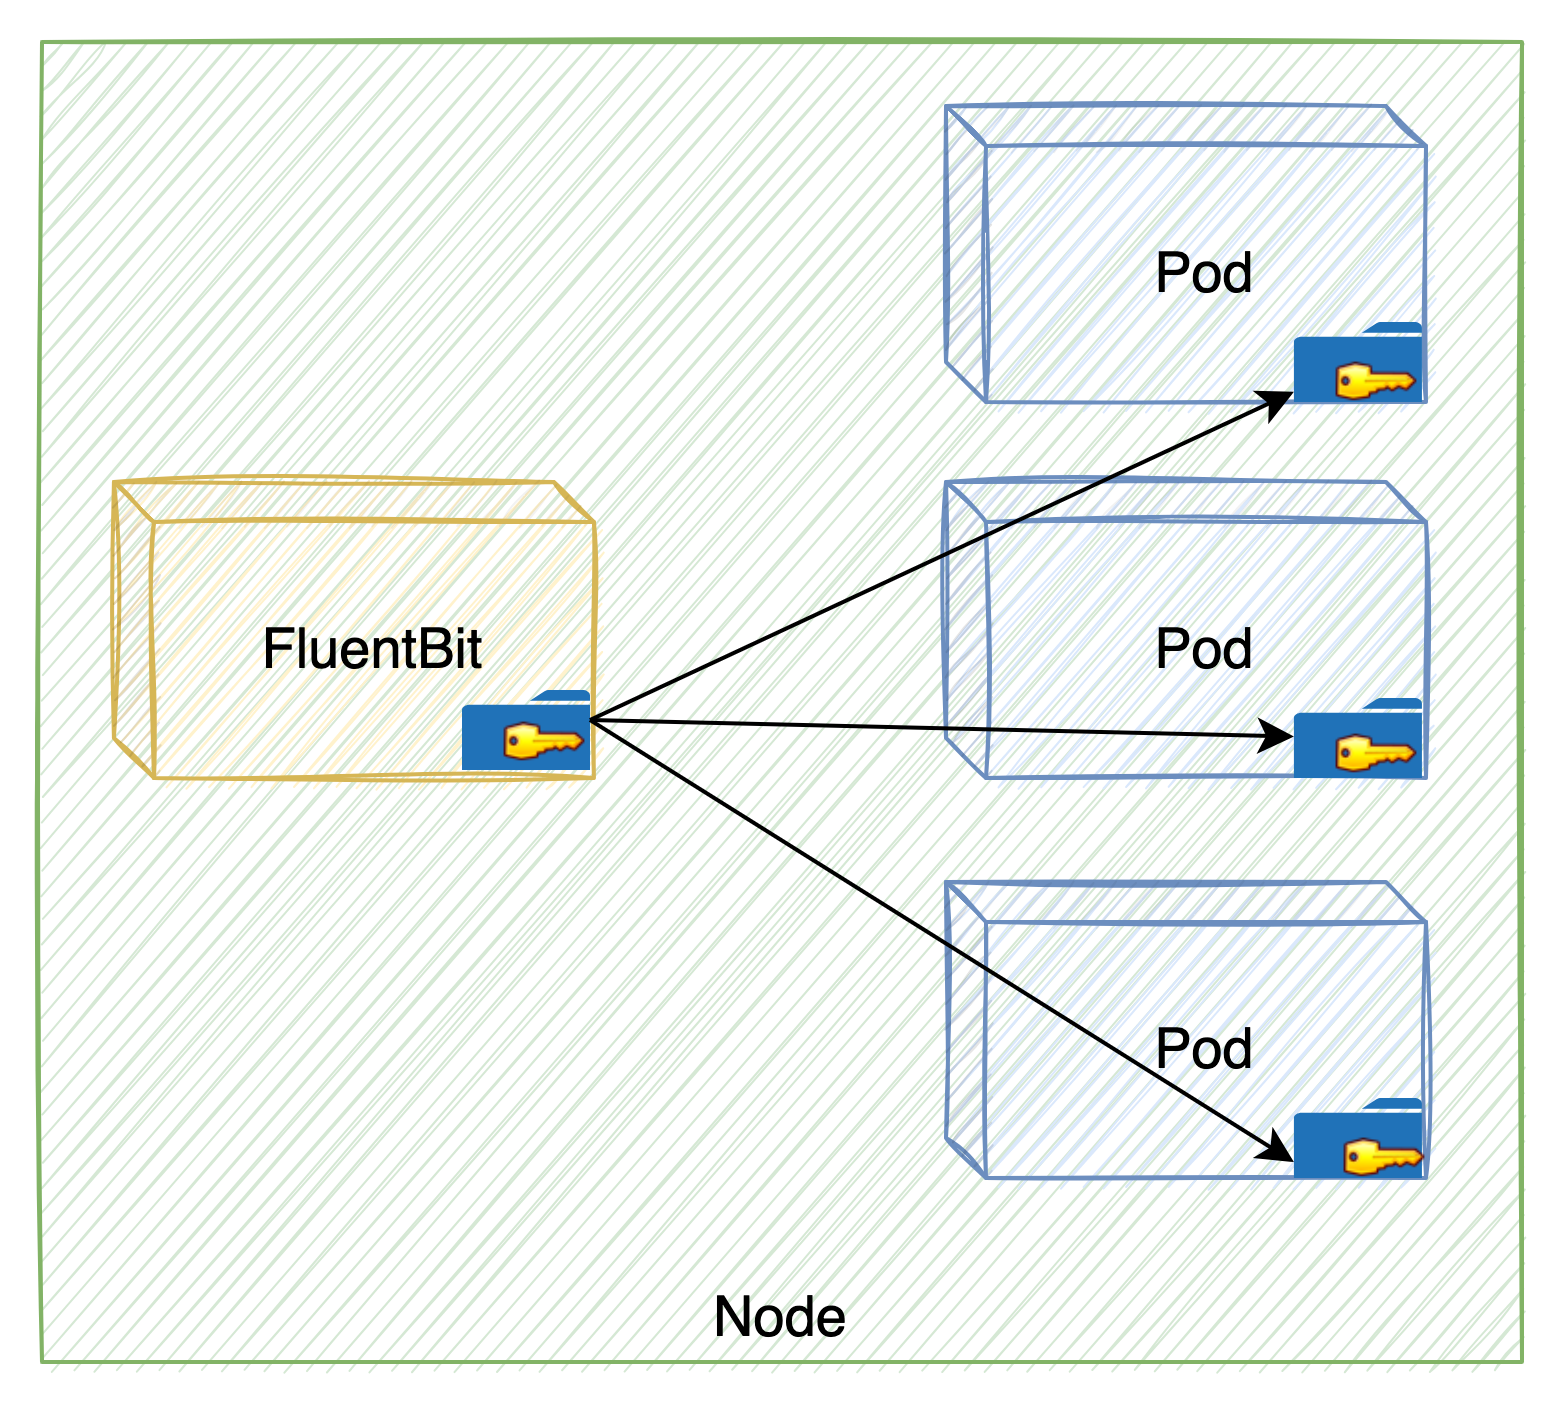 Image 4 is a diagram of FluentBit misconfiguration. FluentBit is giving key access to three separate pods within a node. 